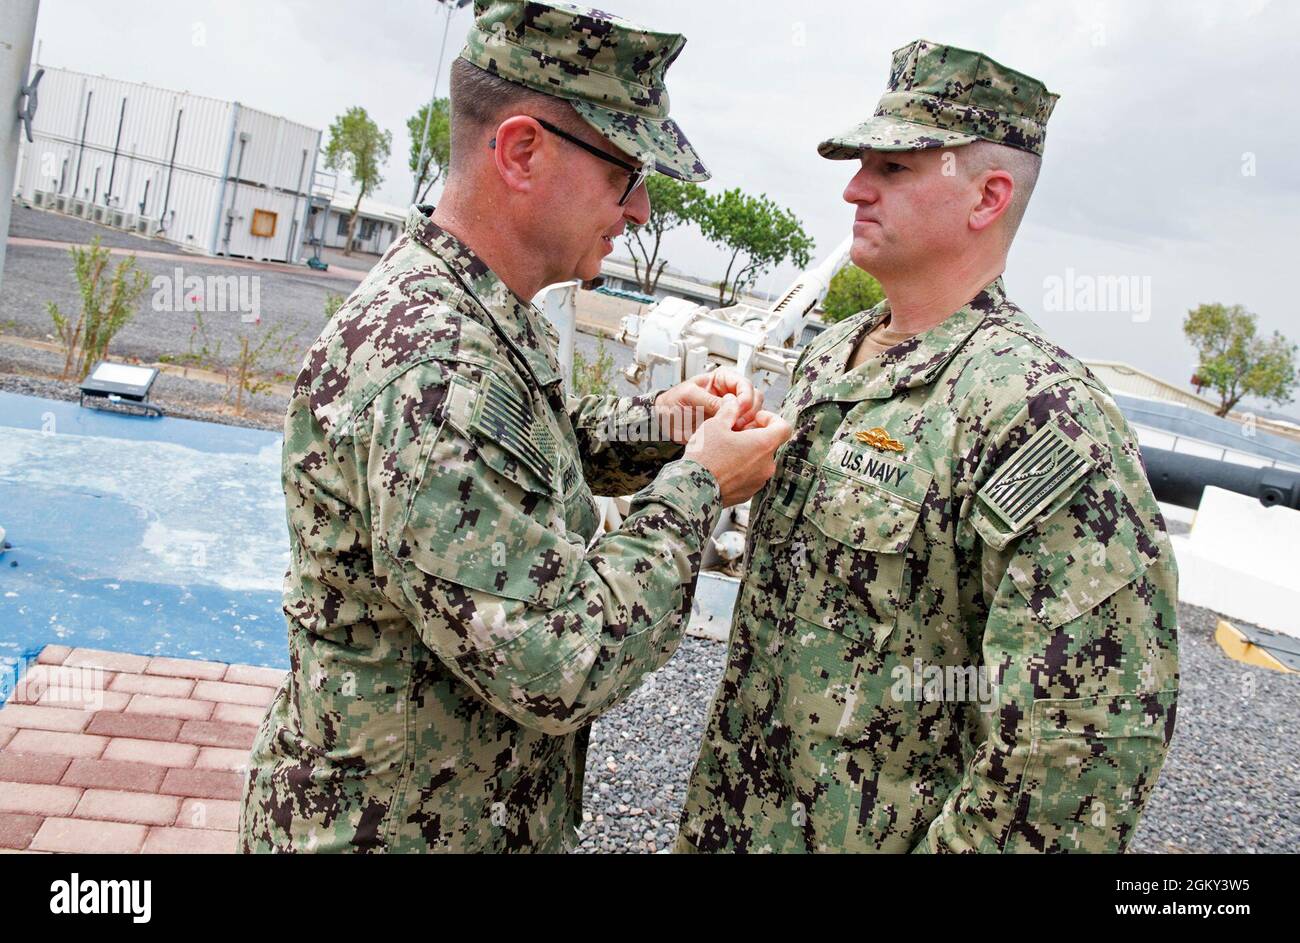 CAMP LEMONNIER, Djibouti (July 24, 2021) U.S. Navy Rear Adm. Michael Curran, Fleet Supply, Logistics, and Ordnance, U.S. Naval Forces Europe/Africa/Sixth Fleet, awards Lt.j.g. Webster McClure, from Stafford, Va., the Navy Expeditionary Supply Corps Officer Warfare pin, July 24, 2021. Camp Lemonnier is an operational installation that enables U.S., allied and partner nation forces to be where and when they are needed to ensure security in Europe, Africa and Southwest Asia. Stock Photo